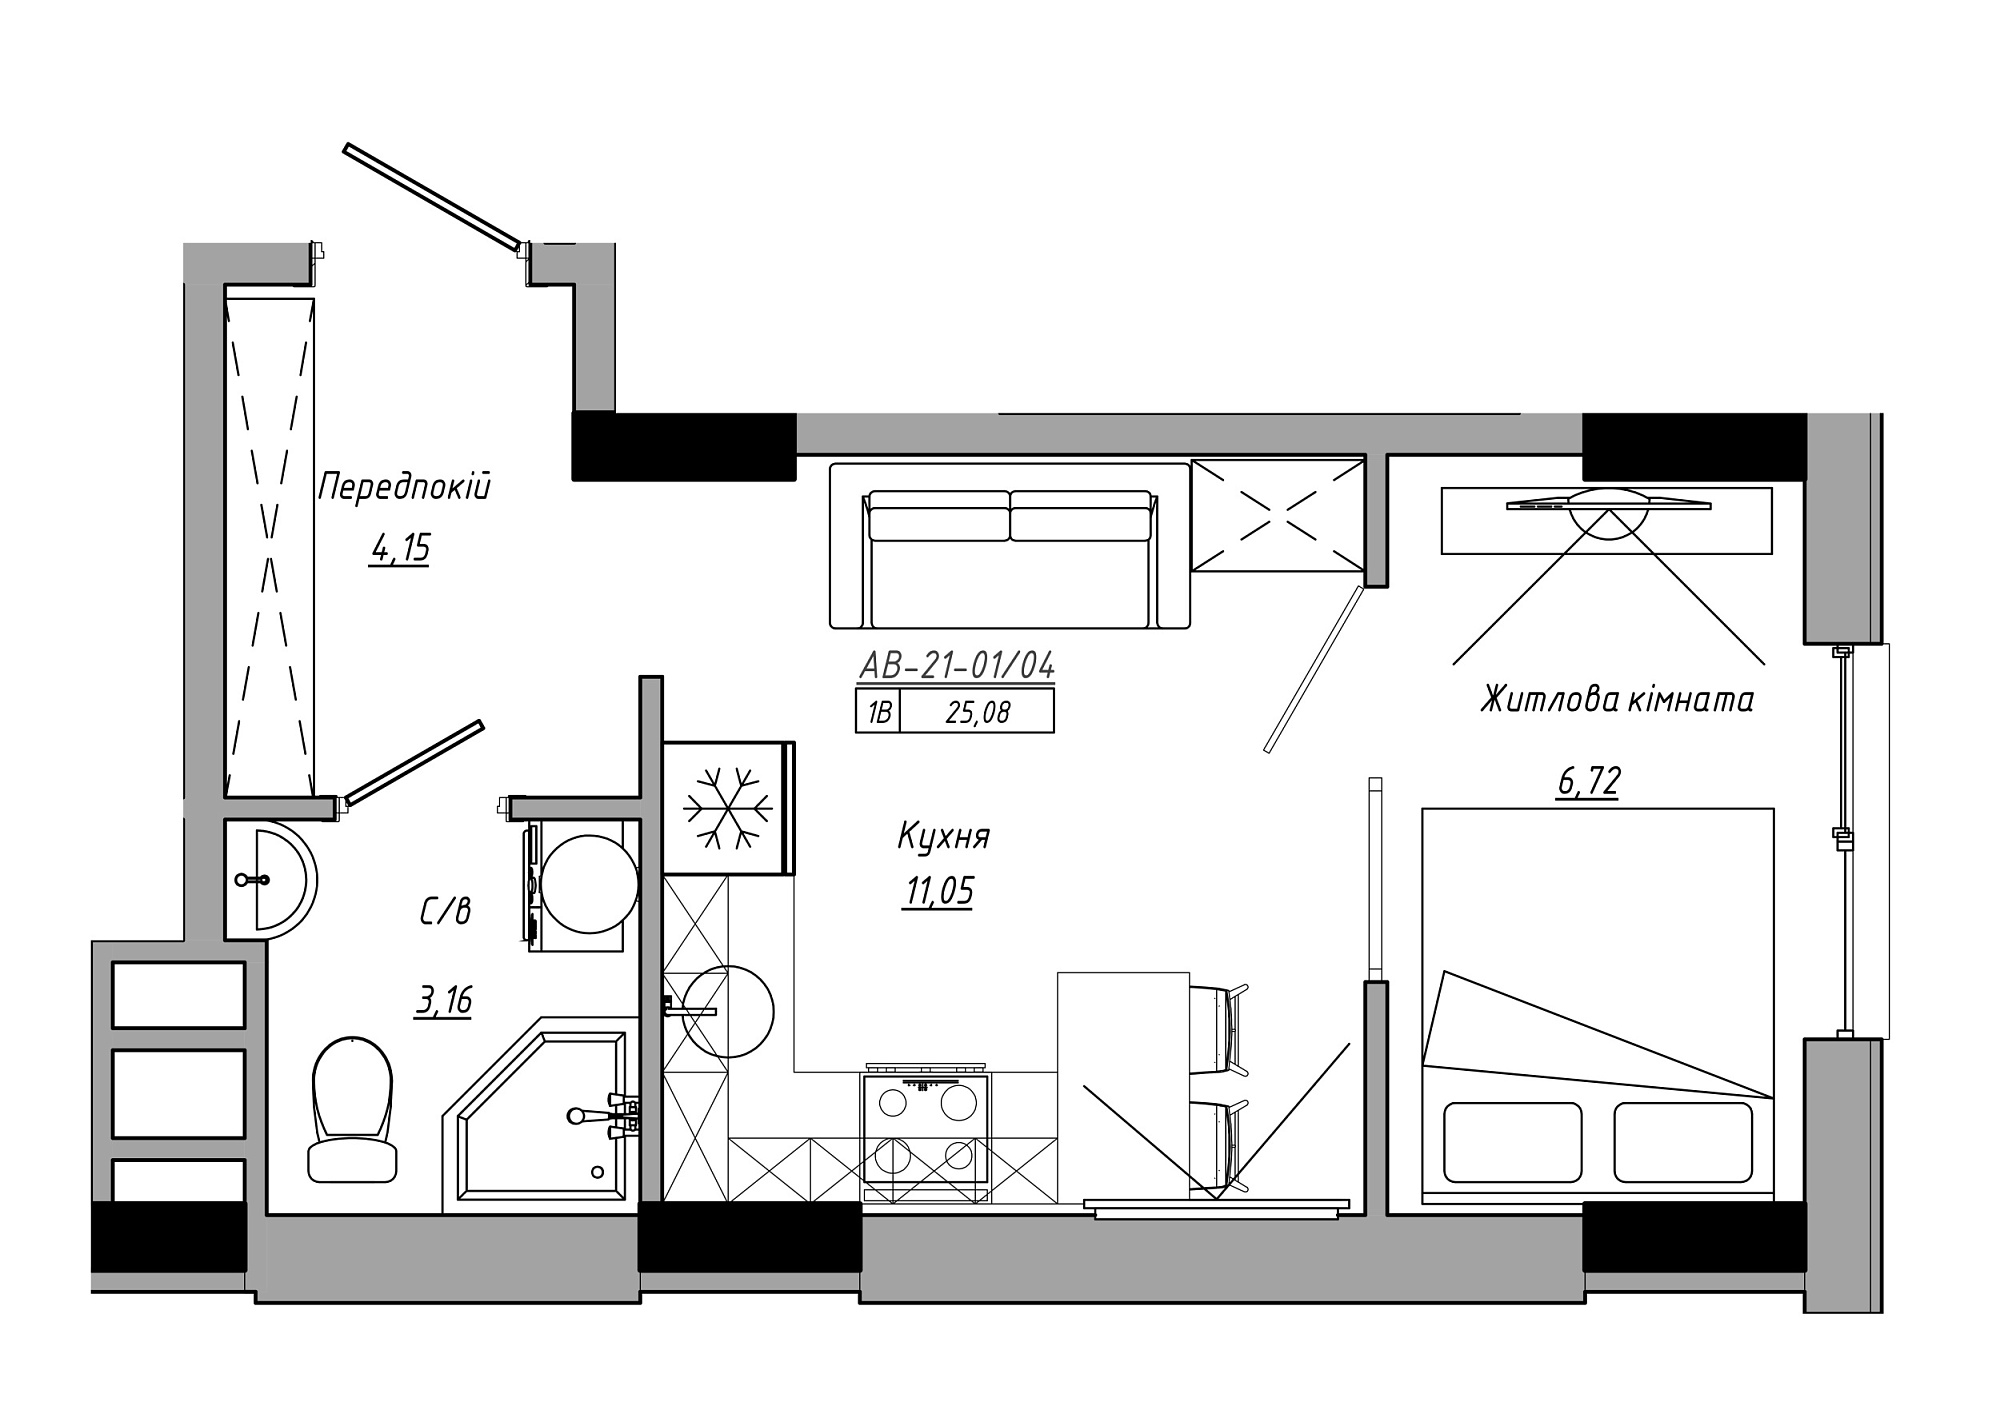 Planning 1-rm flats area 25.08m2, AB-21-01/00004.